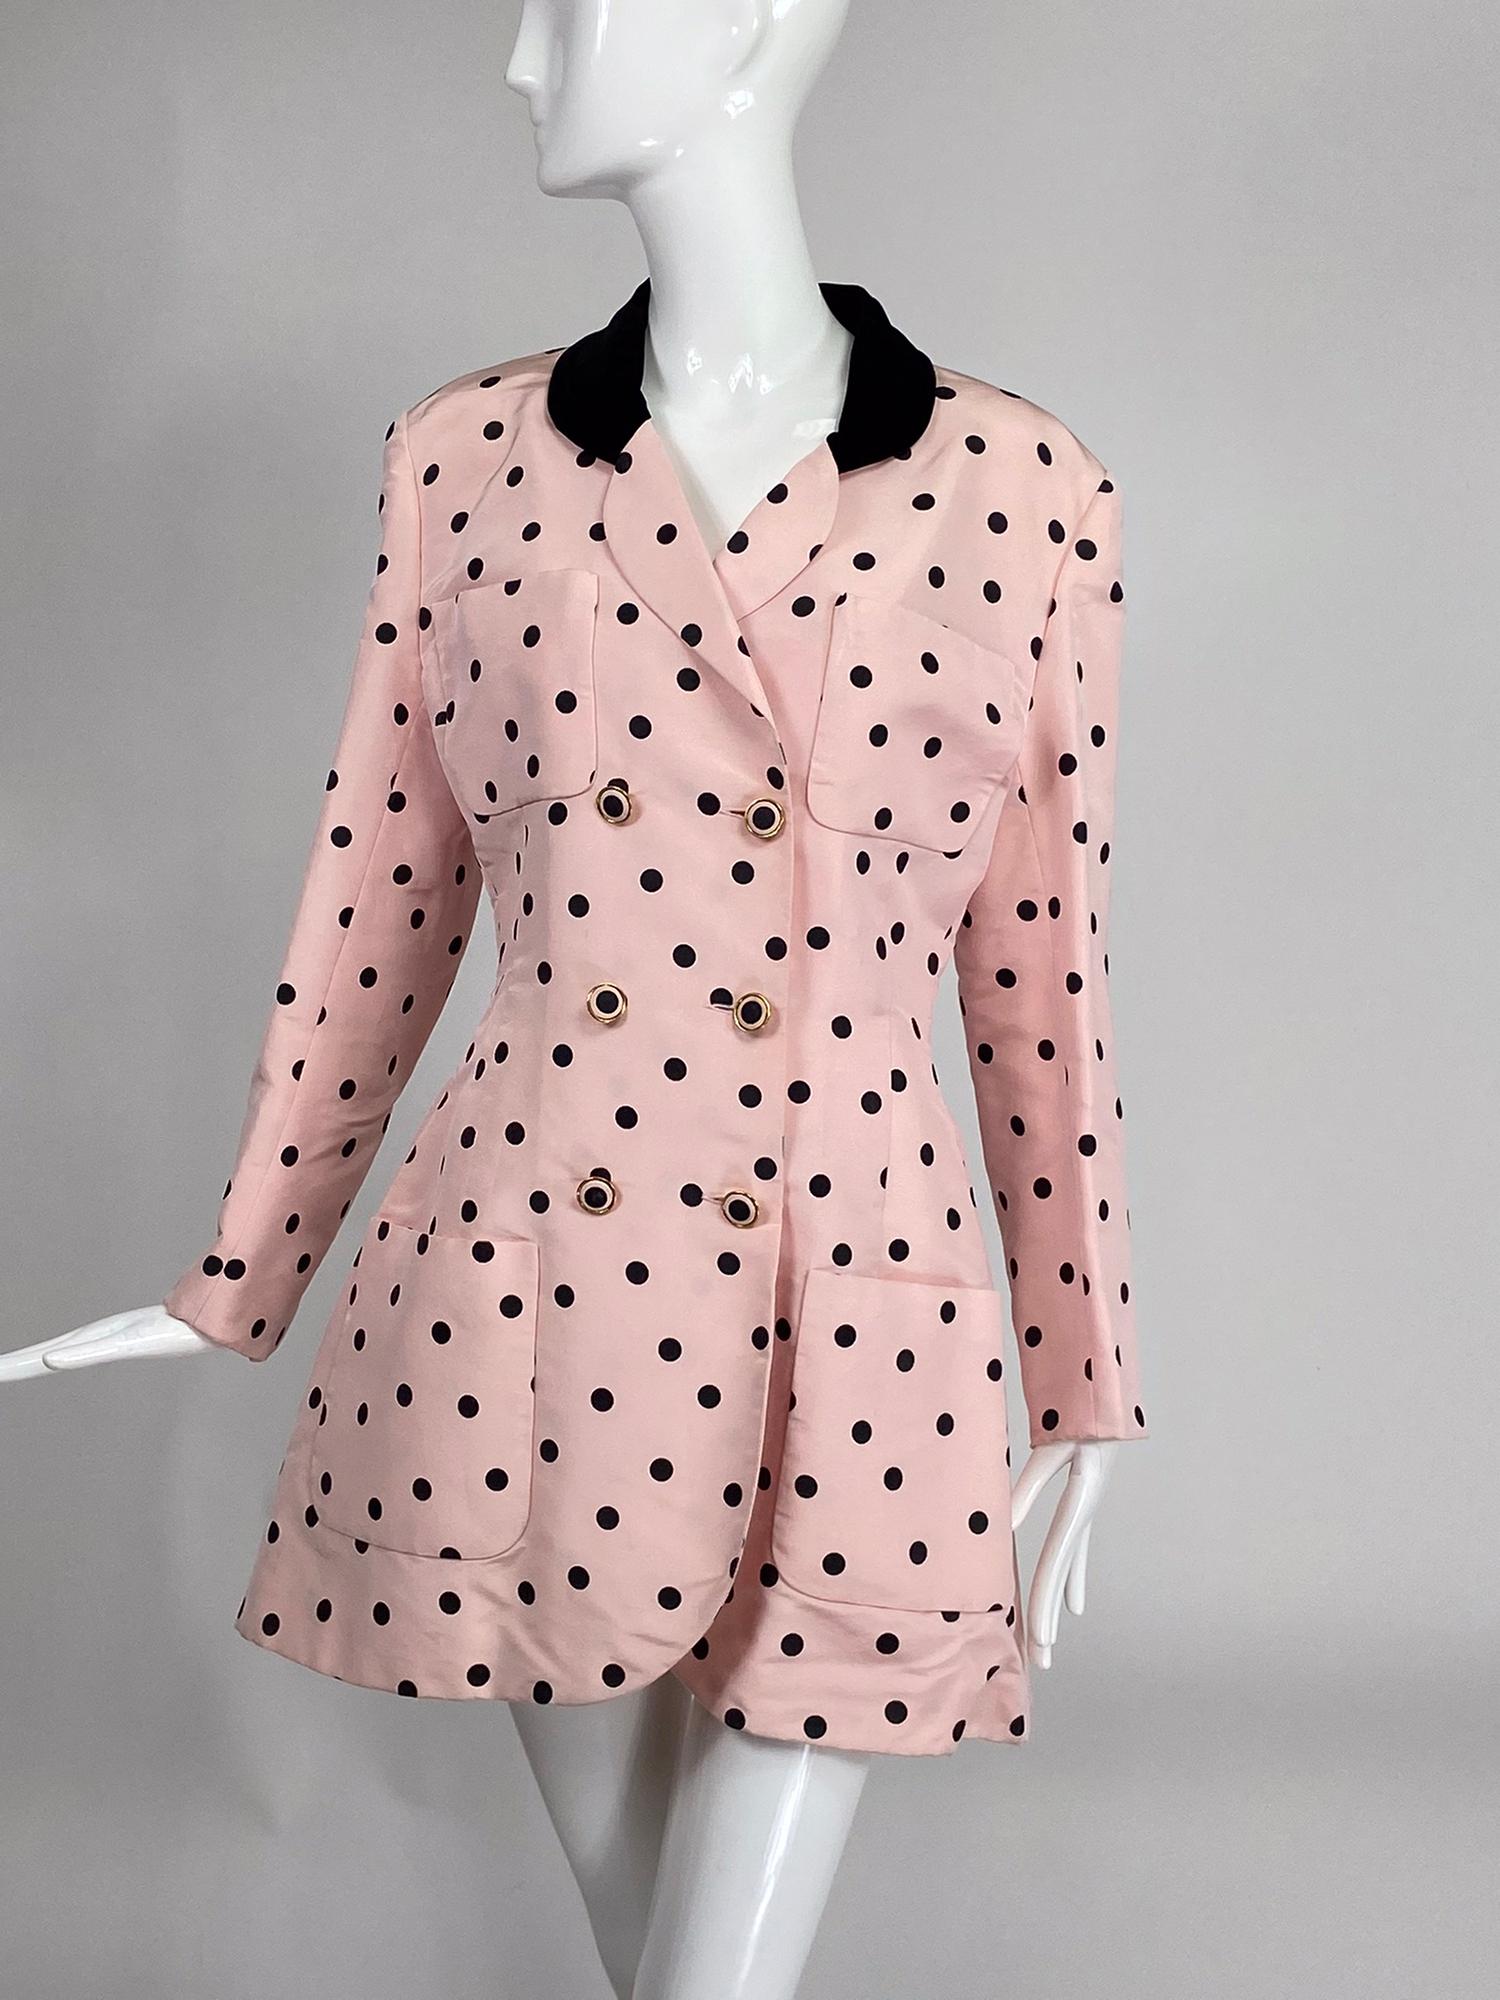 Chanel Fitted Silk Faille Pink & Black Dot Jacket 1990s 2